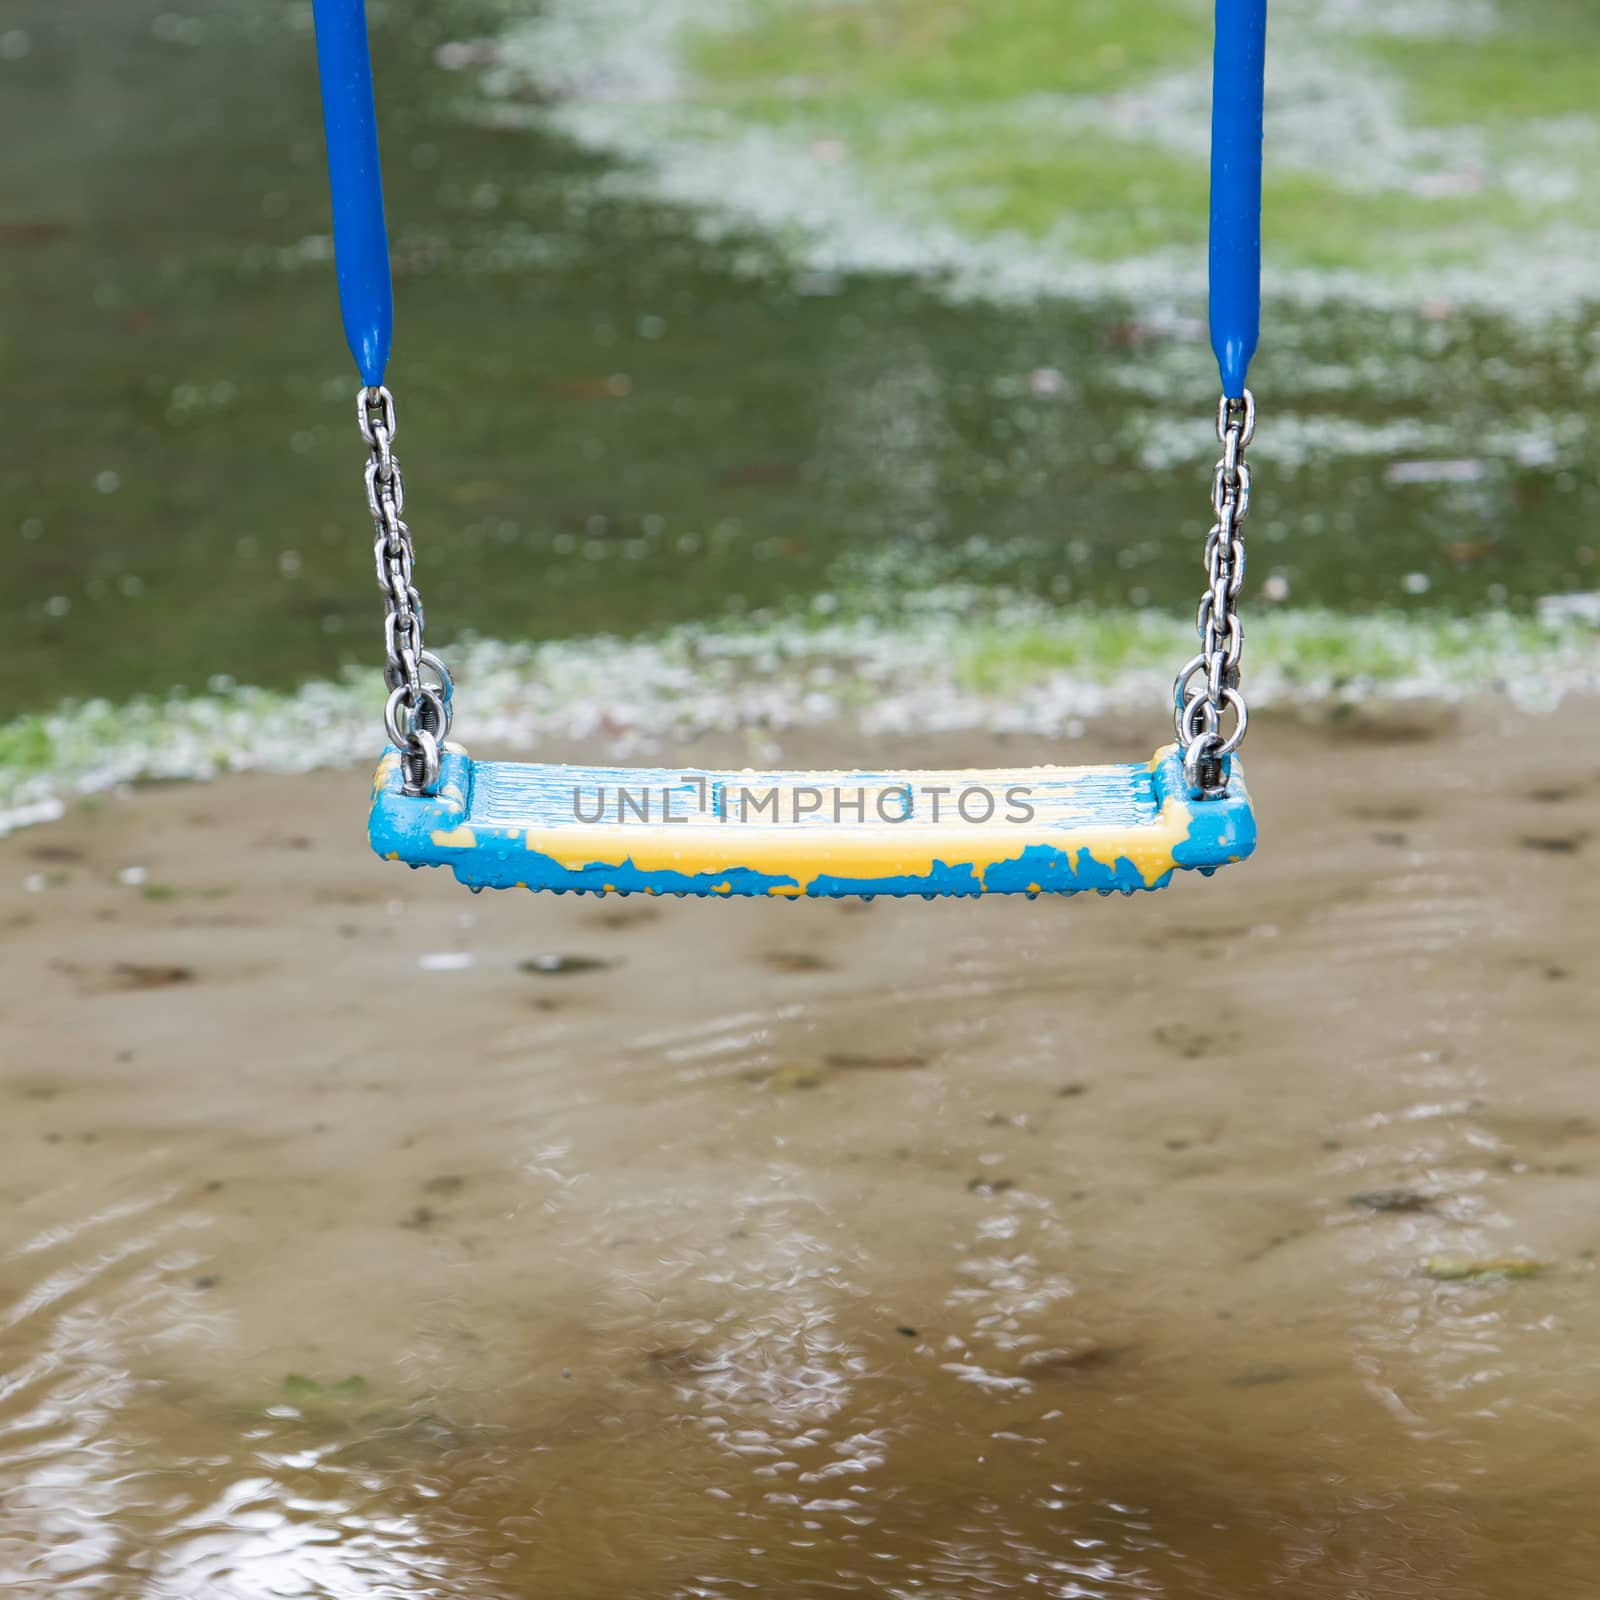 Old plastic swing hanging over a puddle